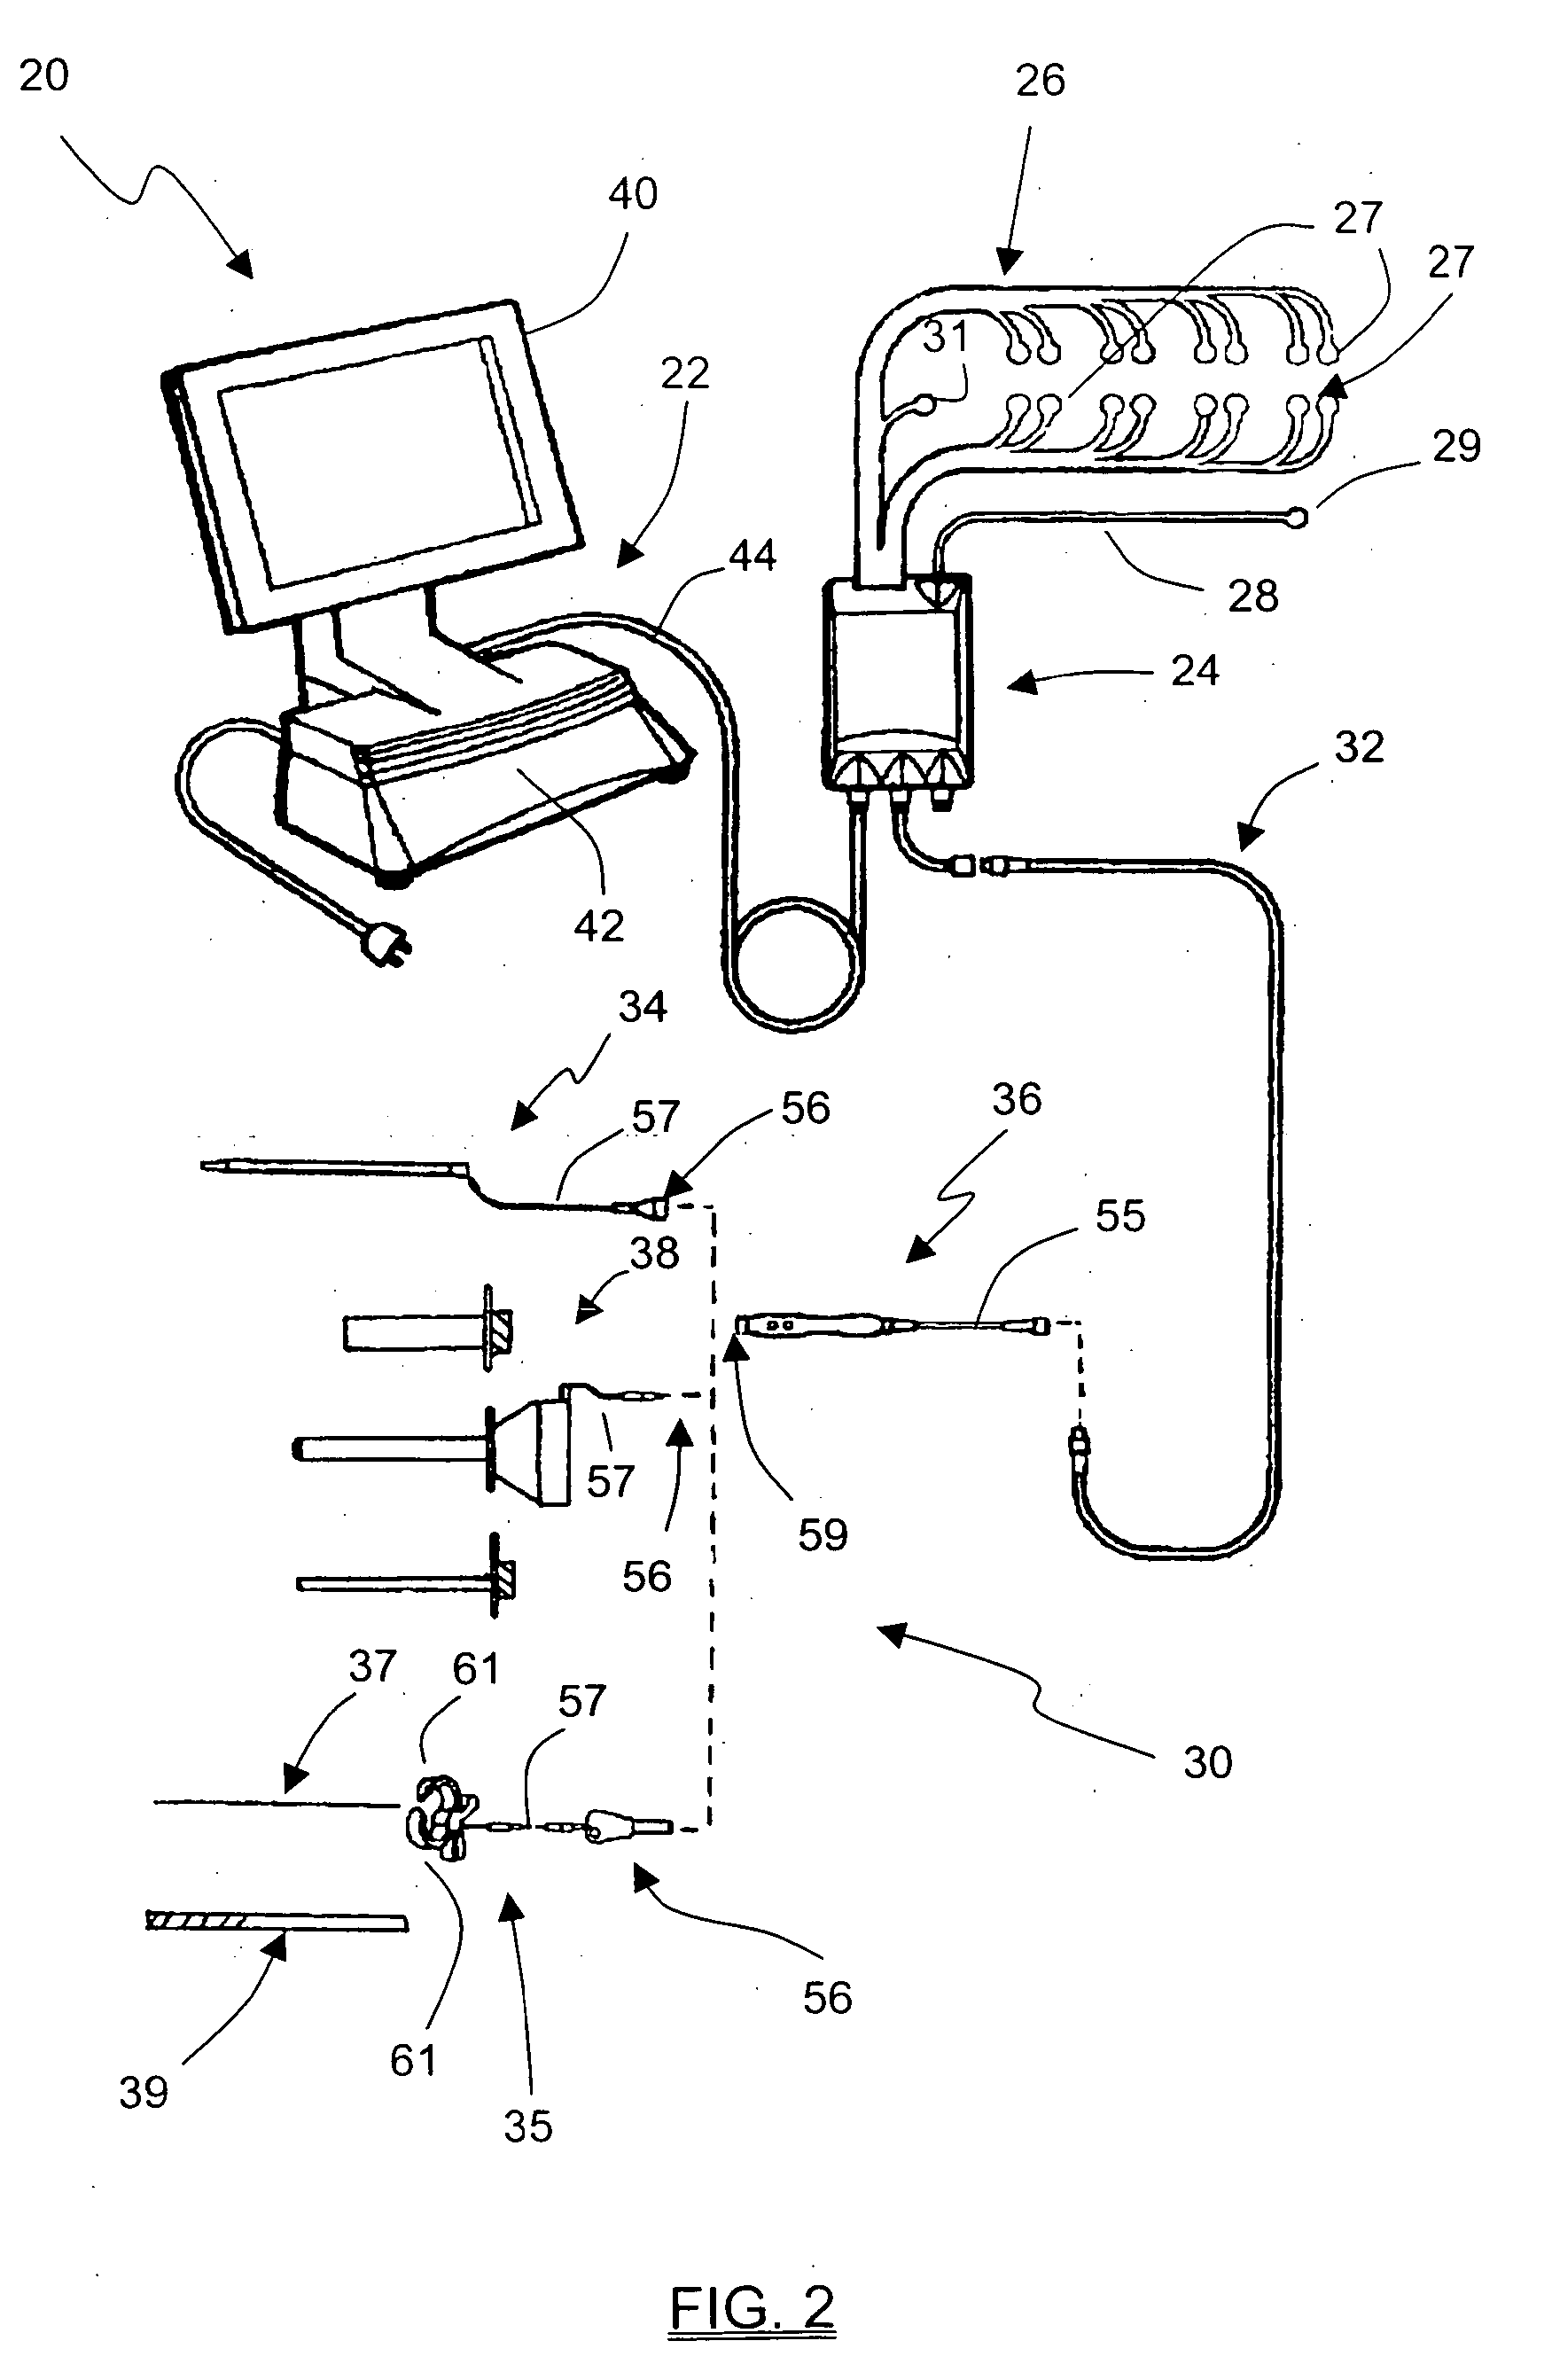 System and methods for performing percutaneous pedicle integrity assessments